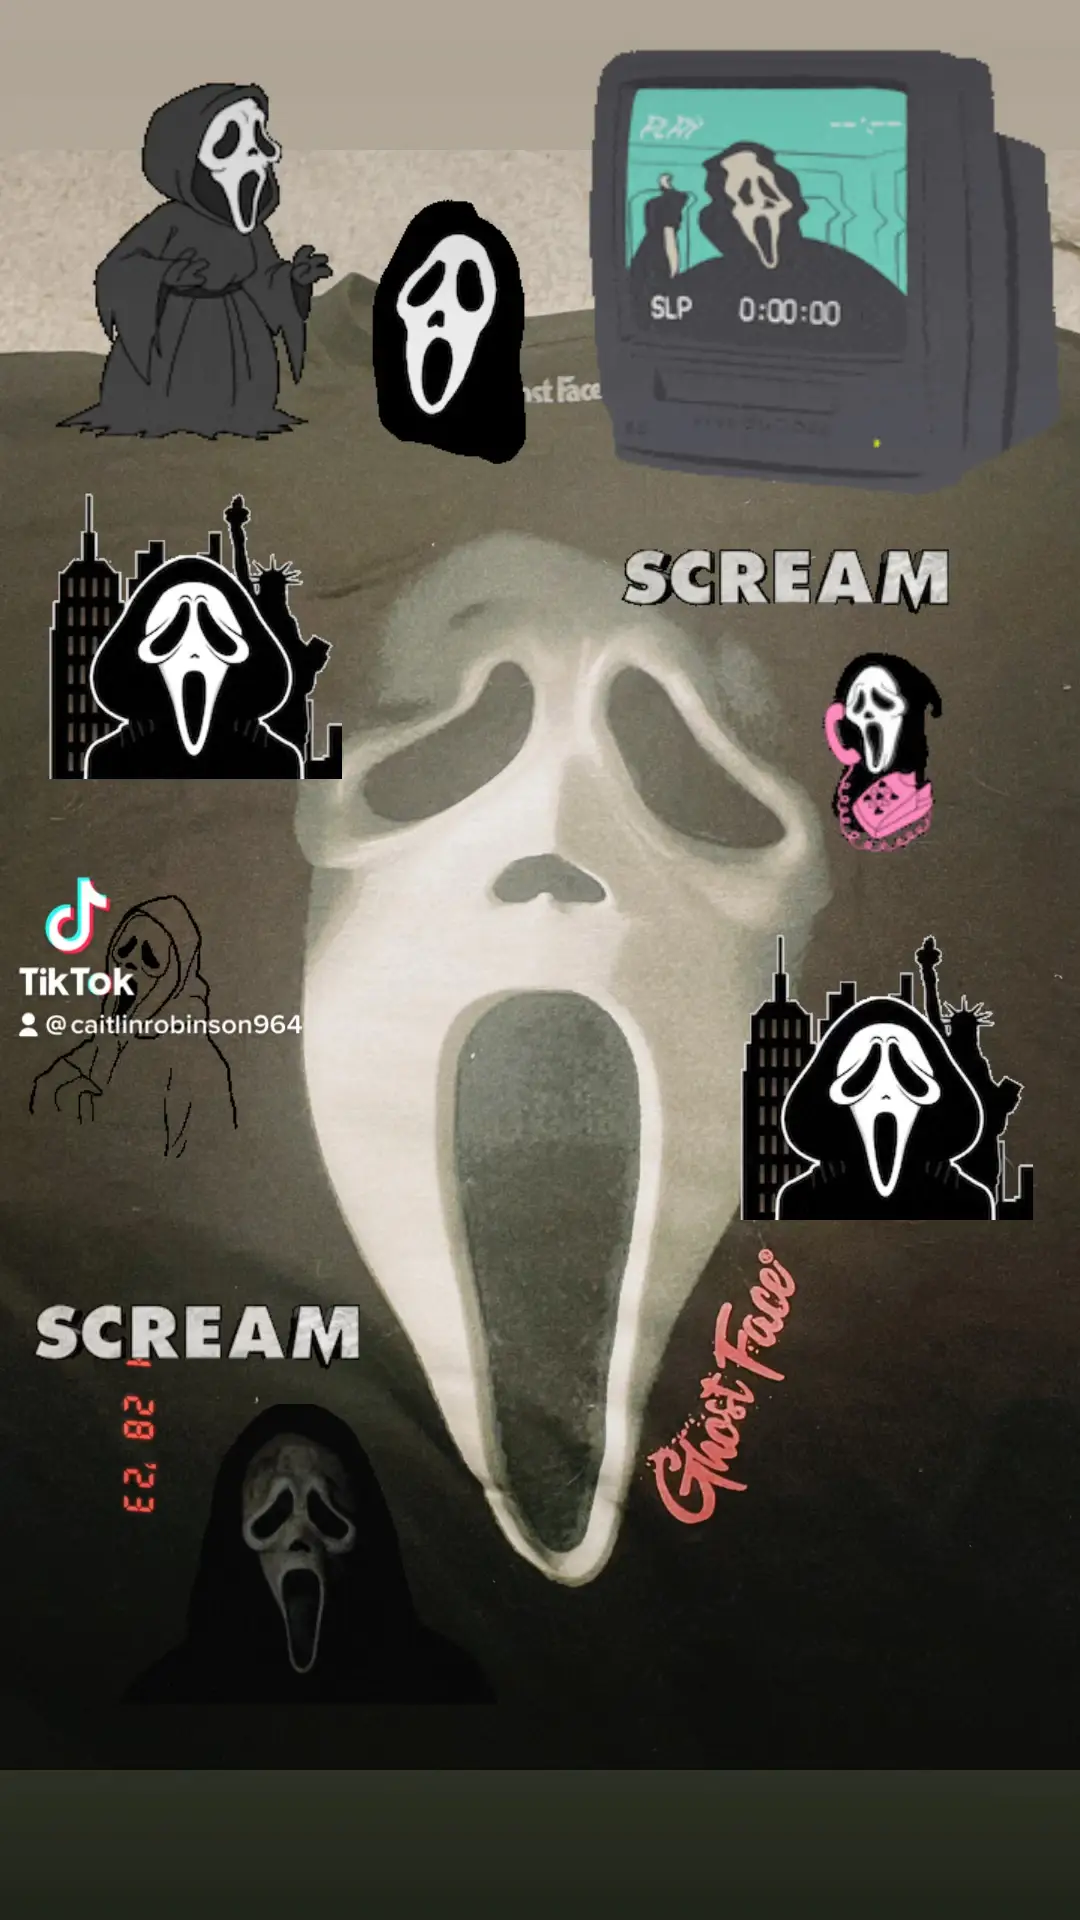 The ghostface characters from the scream movies - Ghostface